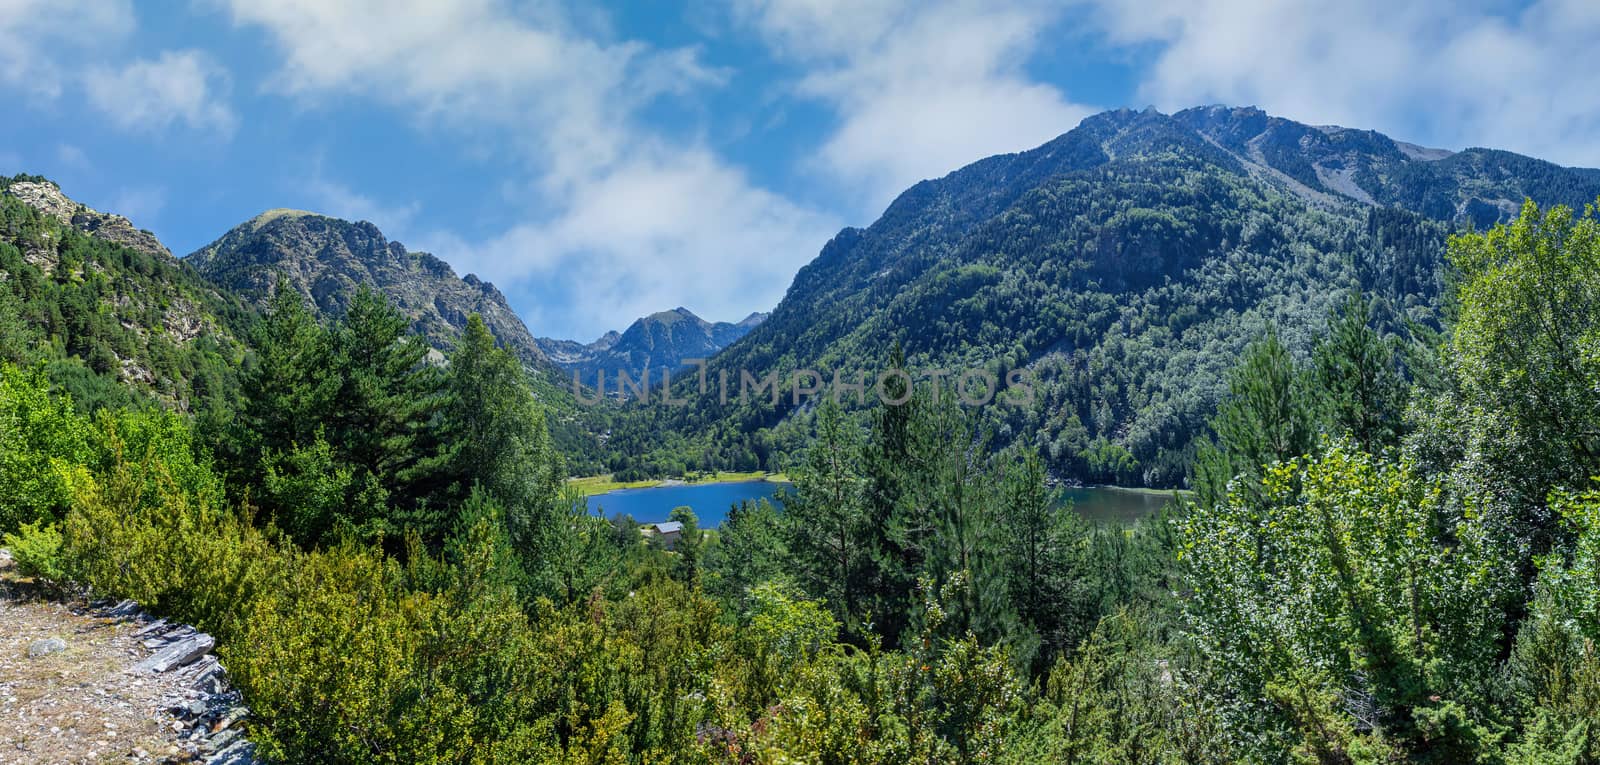 Aigüestortes National Park and Sant Maurici Lake, Catalonia, Spain